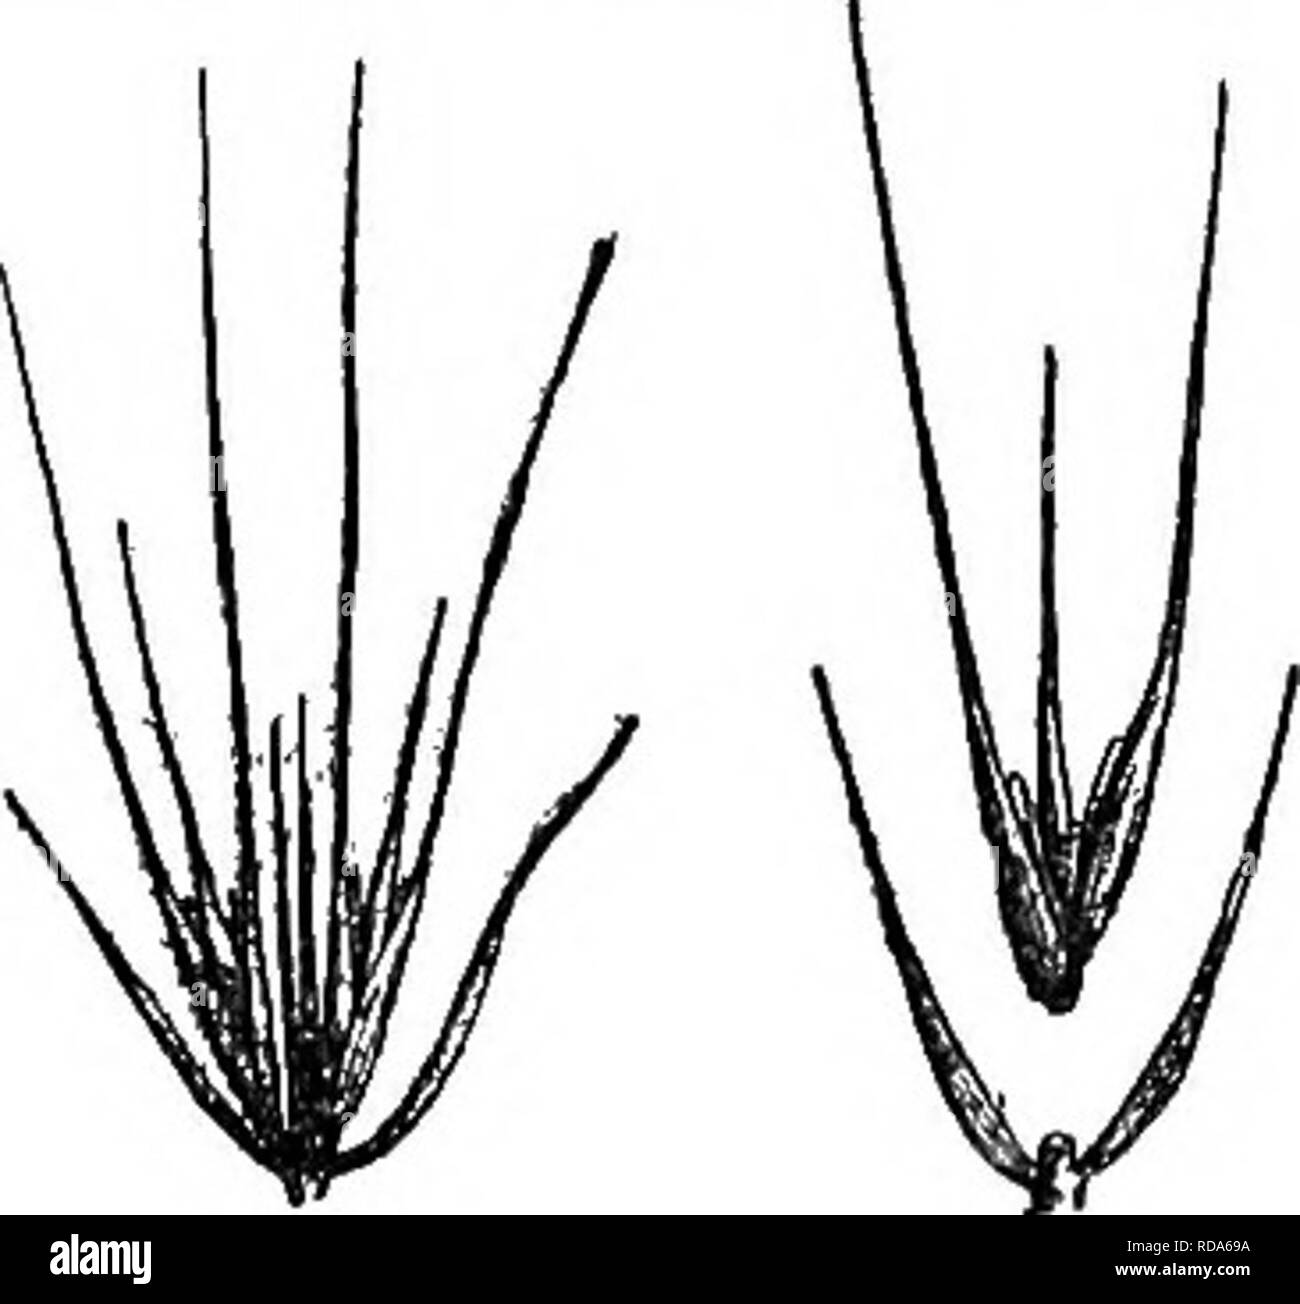 . Gray's new manual of botany. A handbook of the flowering plants and ferns of the central and northeastern United States and adjacent Canada. Botany. 198. E. virgrinicus. Two spikelets X 1, Spikelet with glumes detached x 2. Floret X 2. * Glumes as long as the lemmas or nearly so. *- Glumes and le.mmas rigid, all or only the latter awned. ++ Glumes bowed out, the base yellow and indurated for 1-2 mm, 1. E. virginicus L, Green or glaucous ; culms stout, 6-10 dm. high; sheaths smooth or hairy; blades 1.5-3 dm. long, 4-8 mm. wide, scabrous ; spike 4-14 cm. long, 12 mm. thick, rigidly upright, of Stock Photo